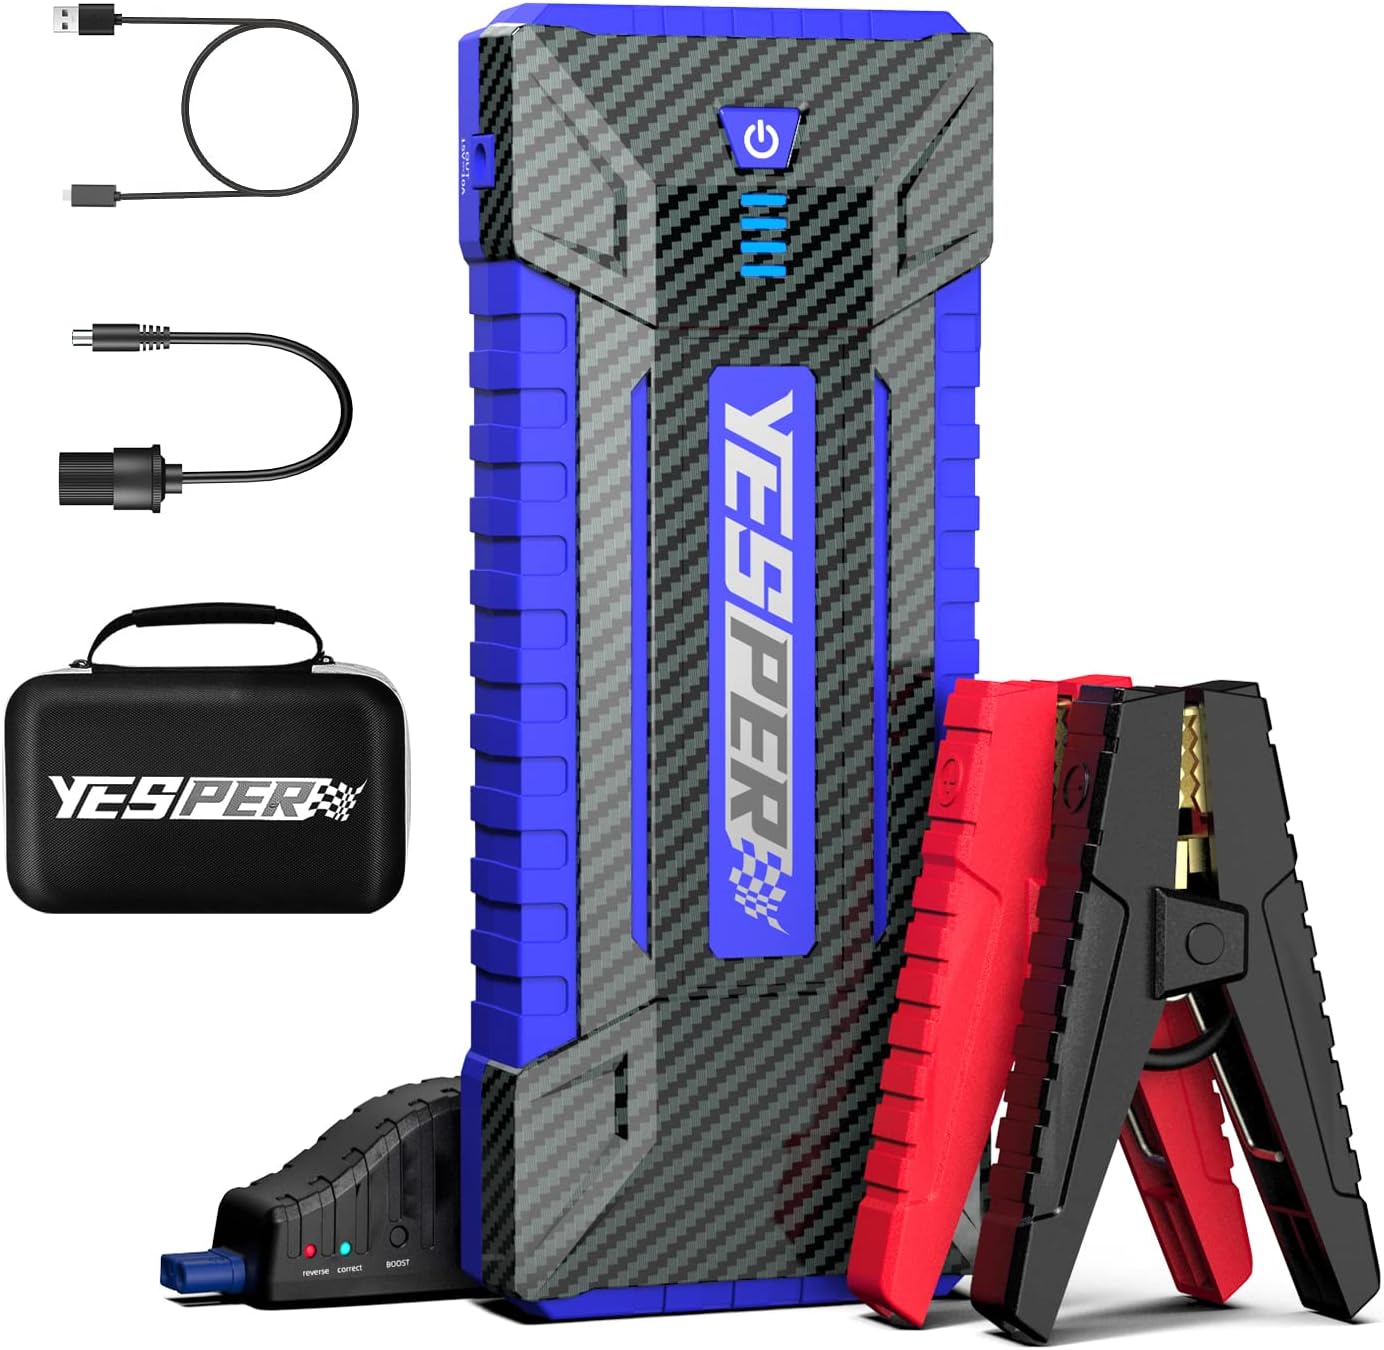 YESPER 2160A Car Jump Starter Portable，Battery Jumper Booster Pack, Boost Jump Box for Most 12V Vehicle (Up to 9.0L Gas/7.0L Diesel Engine), DSLI Safe Tech, PD 15W Fast Charge & DC 15V Port